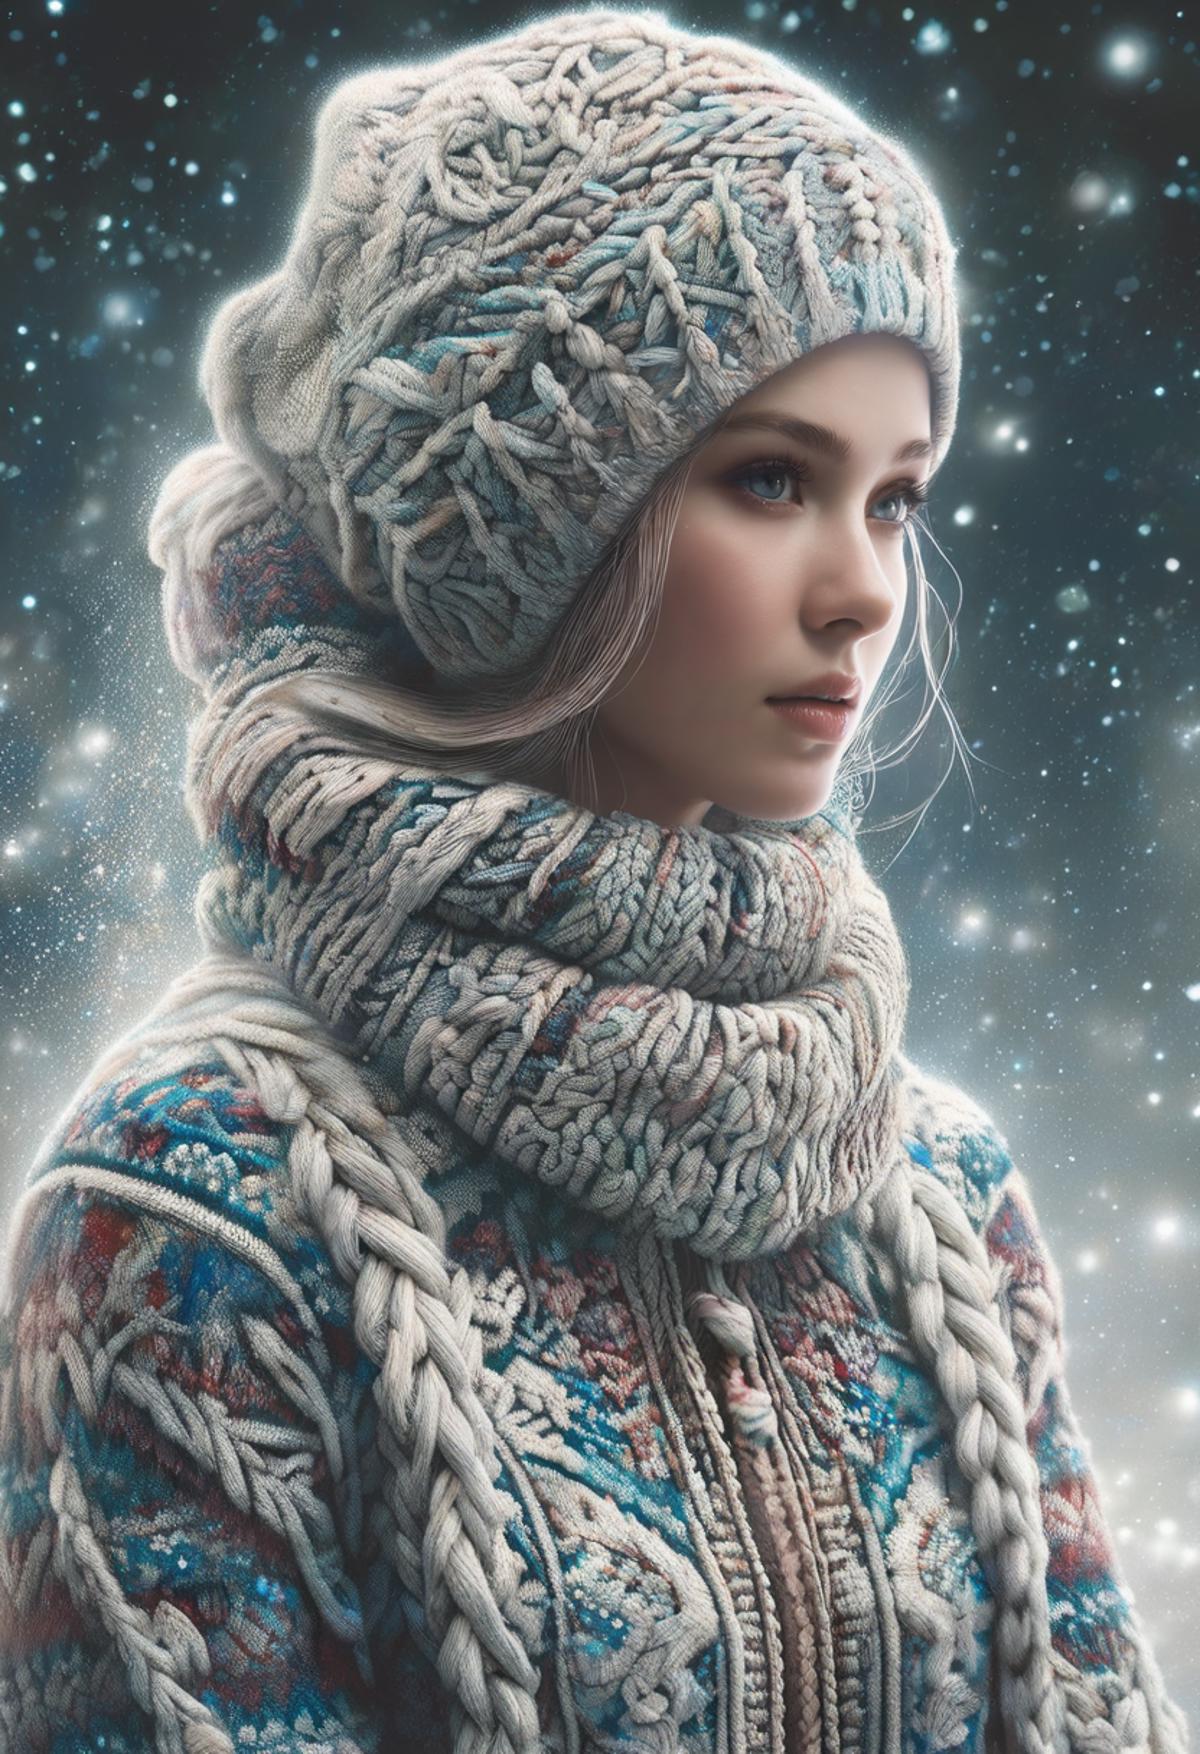 The woman is wearing a knitted hat and scarf, looking at the camera.